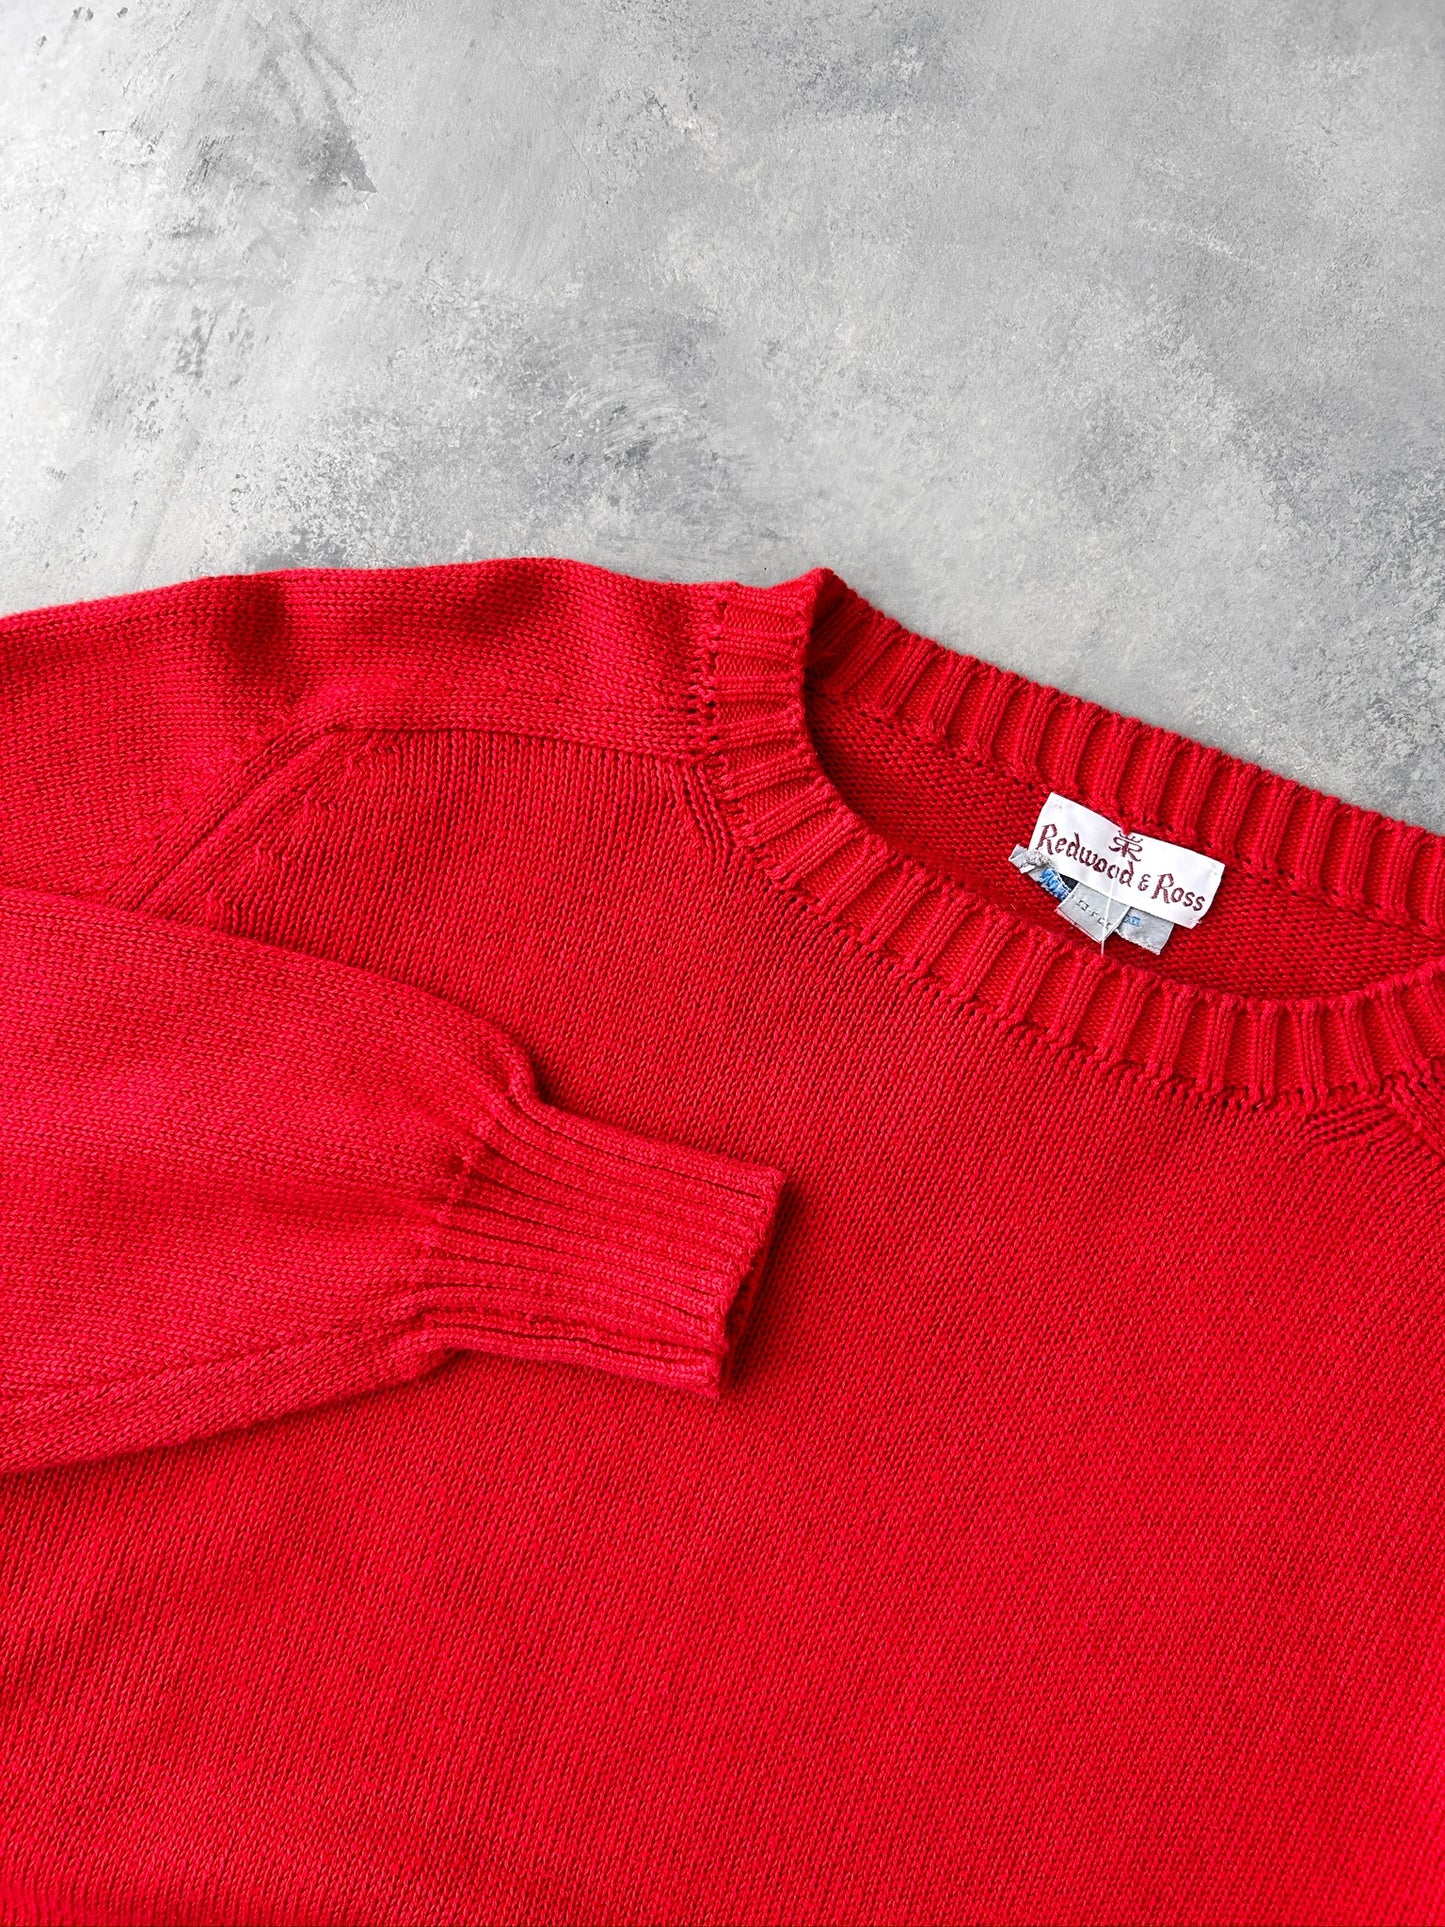 Red Cotton Sweater 90's - Large